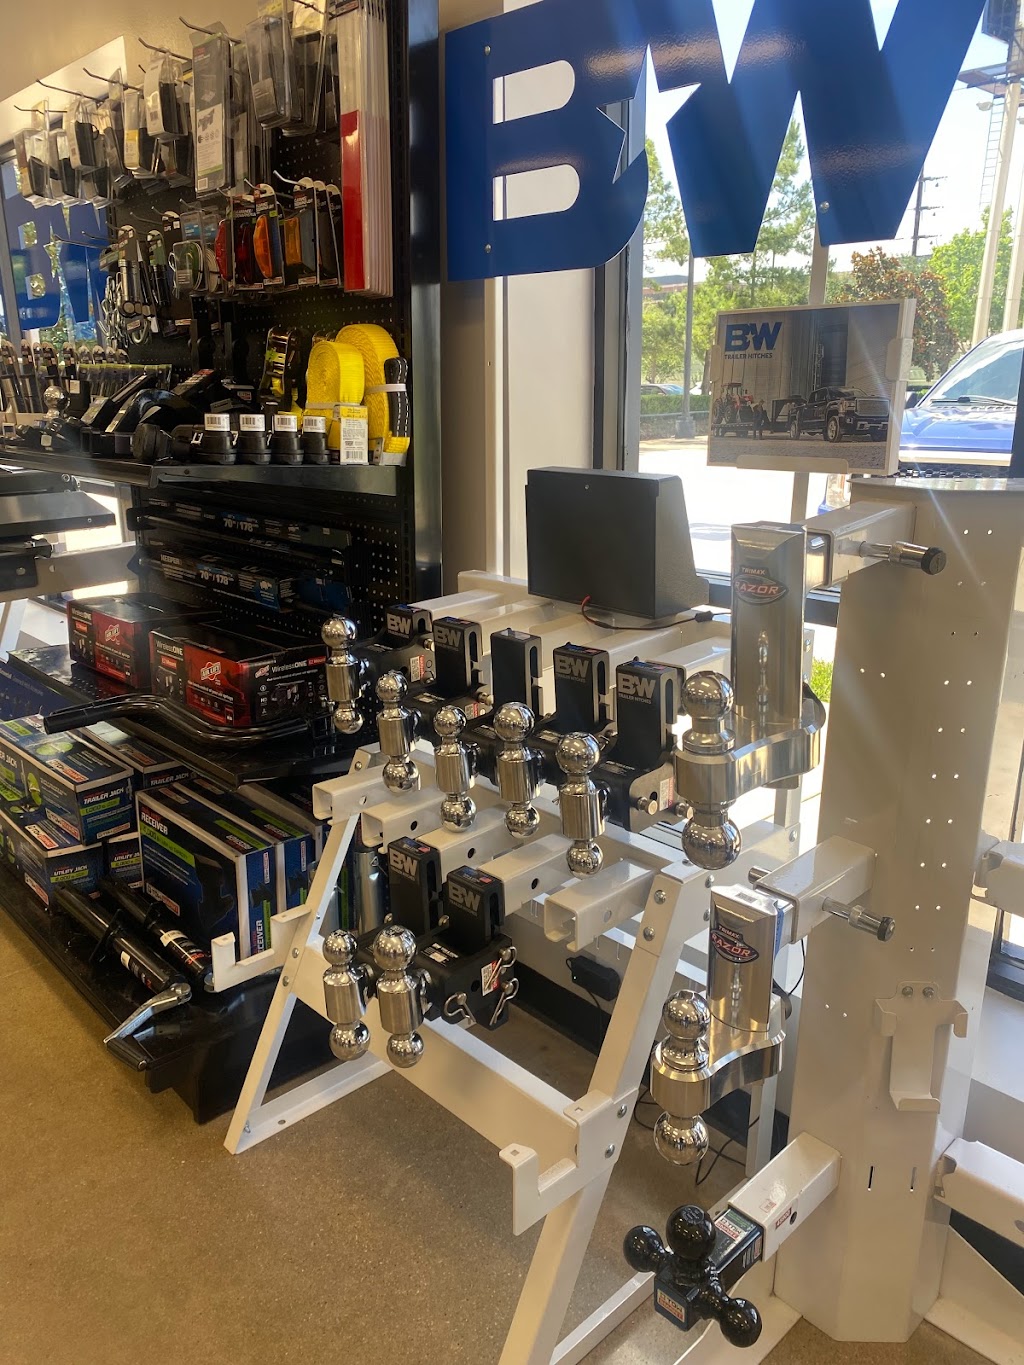 Discount Hitch & Truck Accessories | 16009 Katy Fwy, Houston, TX 77094 | Phone: (713) 939-0880